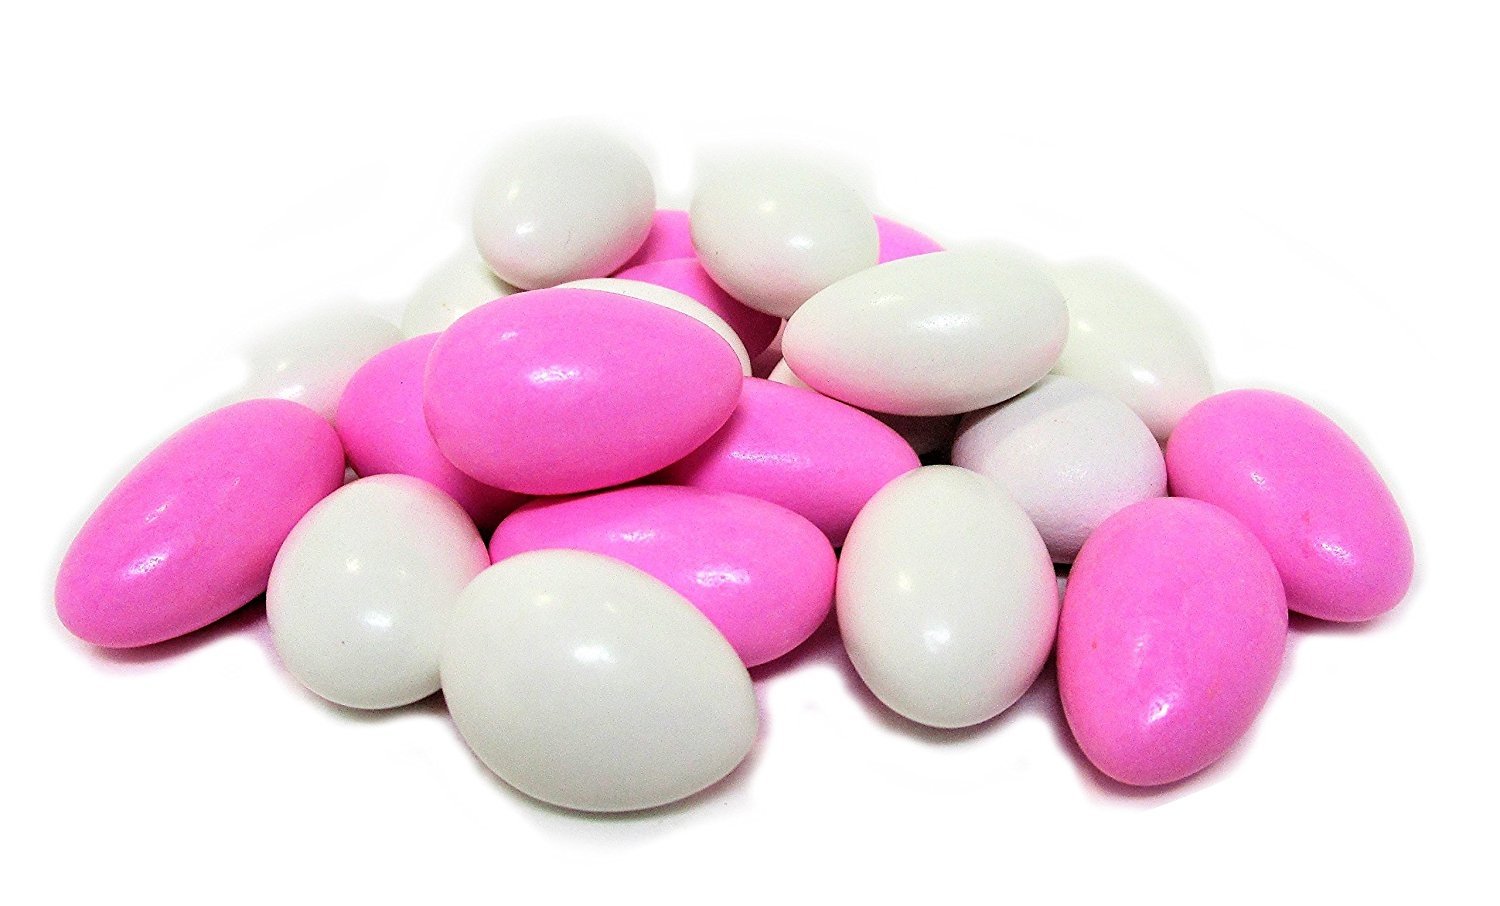 It's Delish Pink & White Jordan Almonds  | Festive Girl Theme Almond Nut Coated in Sweet Hard Candy Shell (2 lbs)